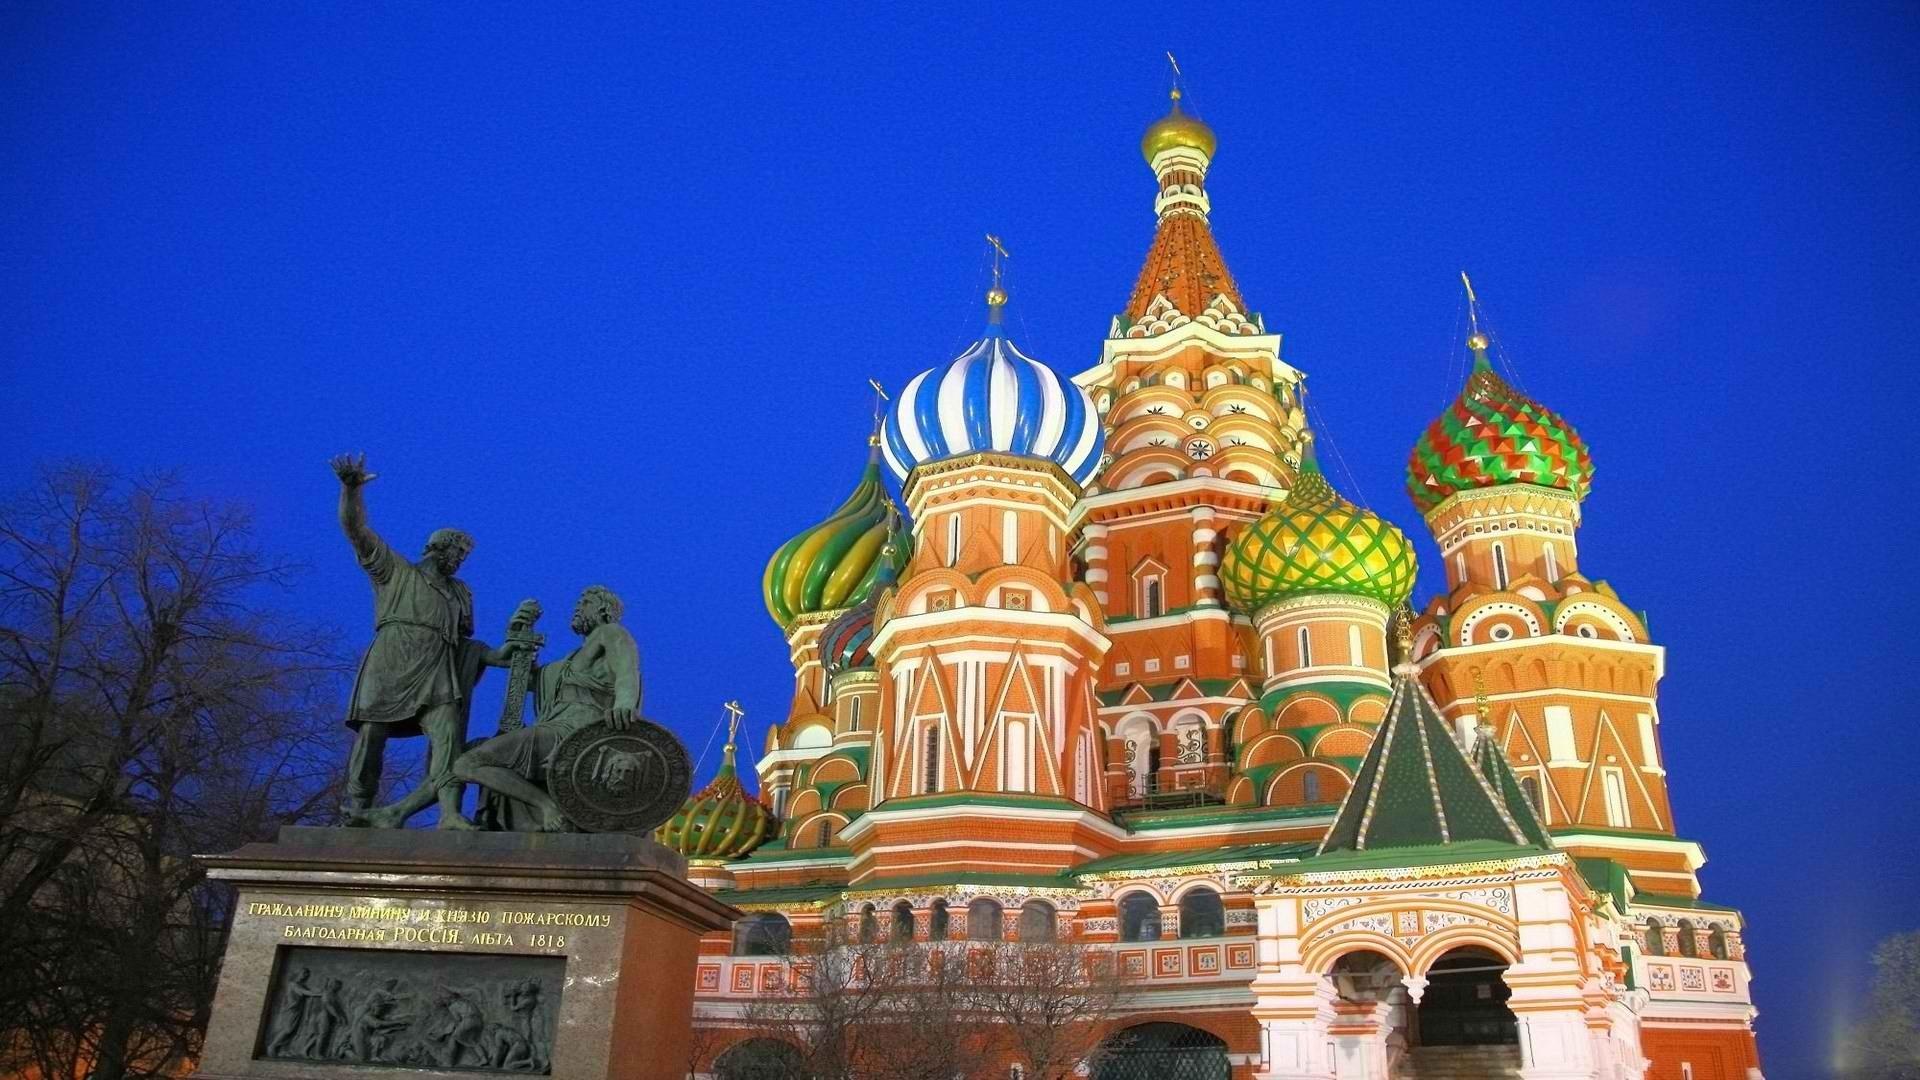 Download wallpaper 1920x1080 moscow, russia, kremlin, red